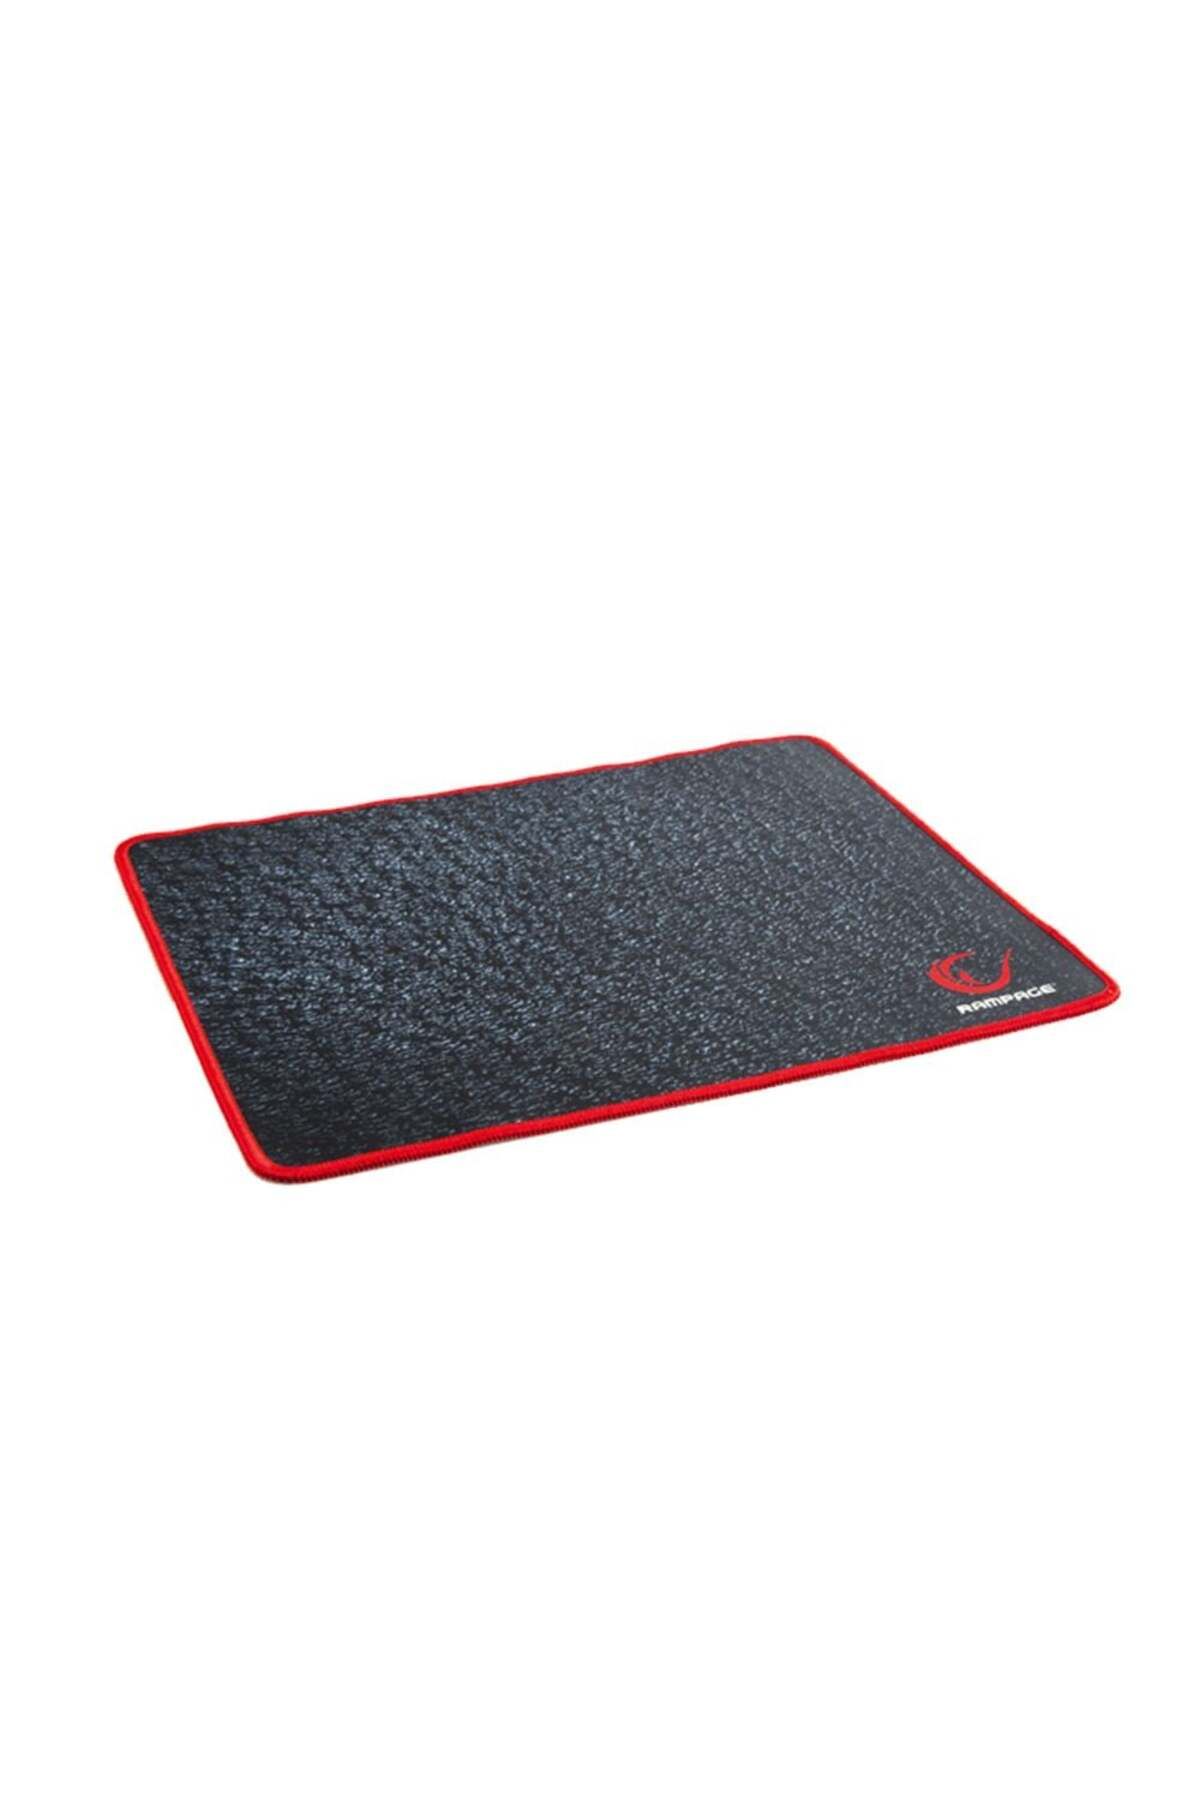 Rampage Mp-12 Gaming Mouse Pad, 340x260x2.5mm